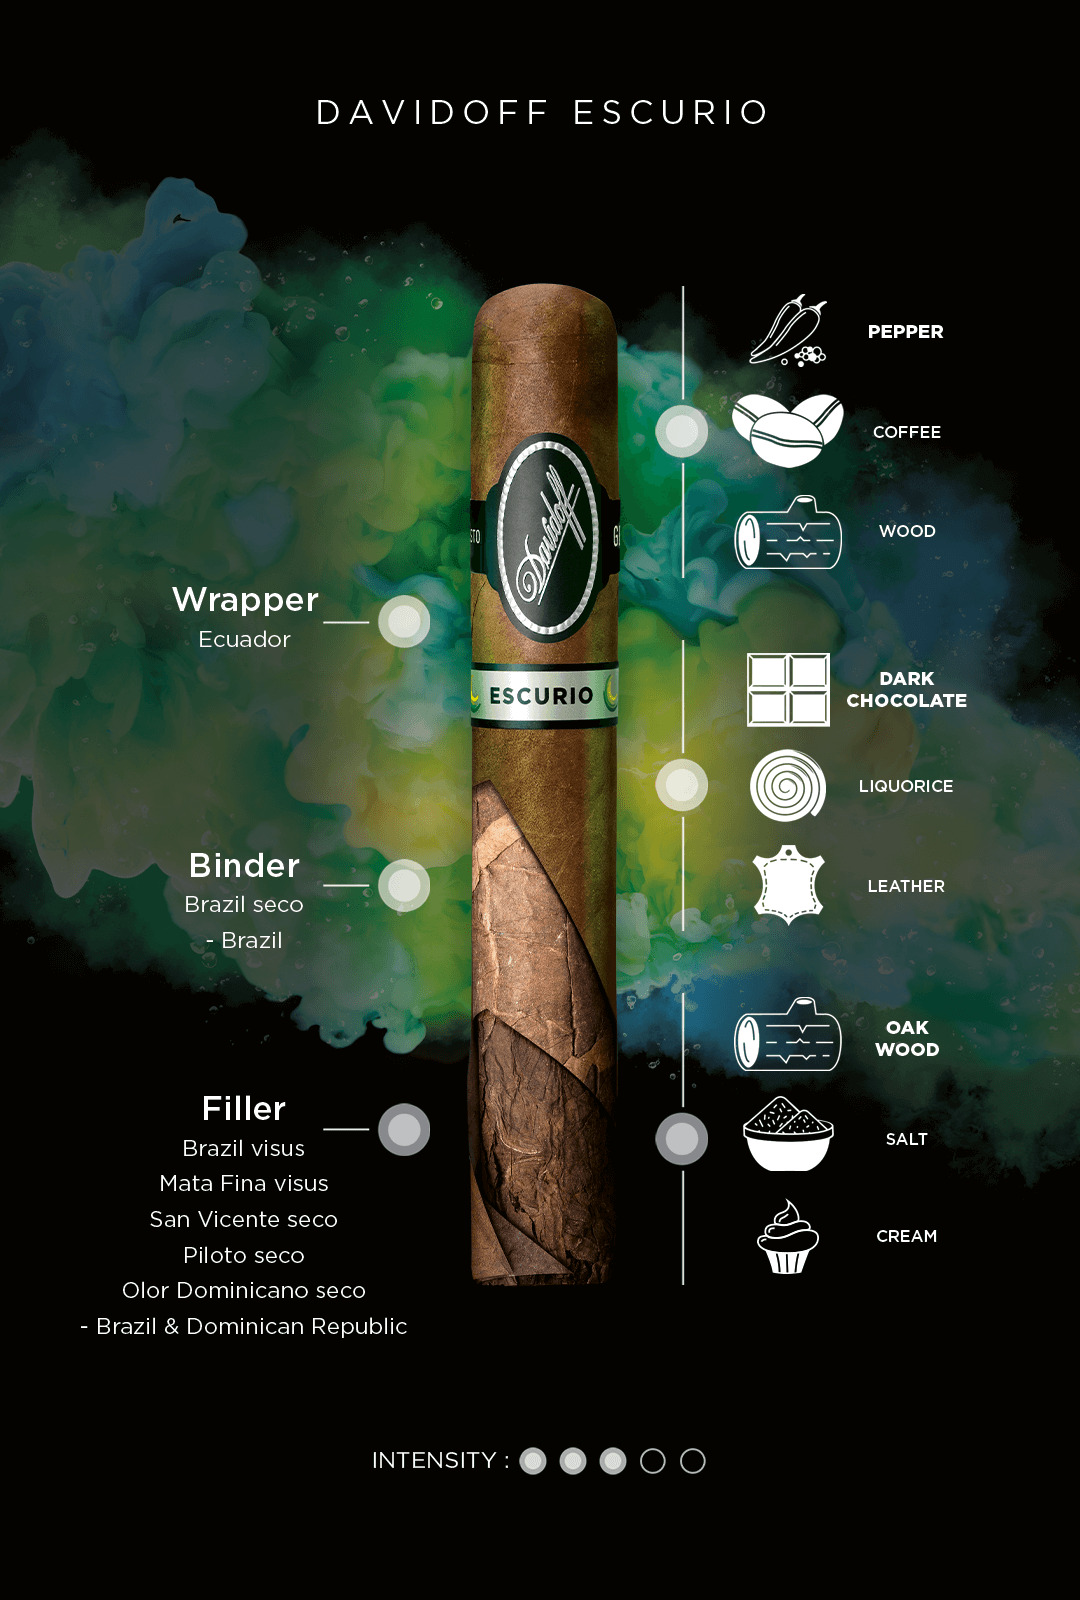 Taste banner of Davidoff Escurio cigars including aromas, tobacco information and intensity.